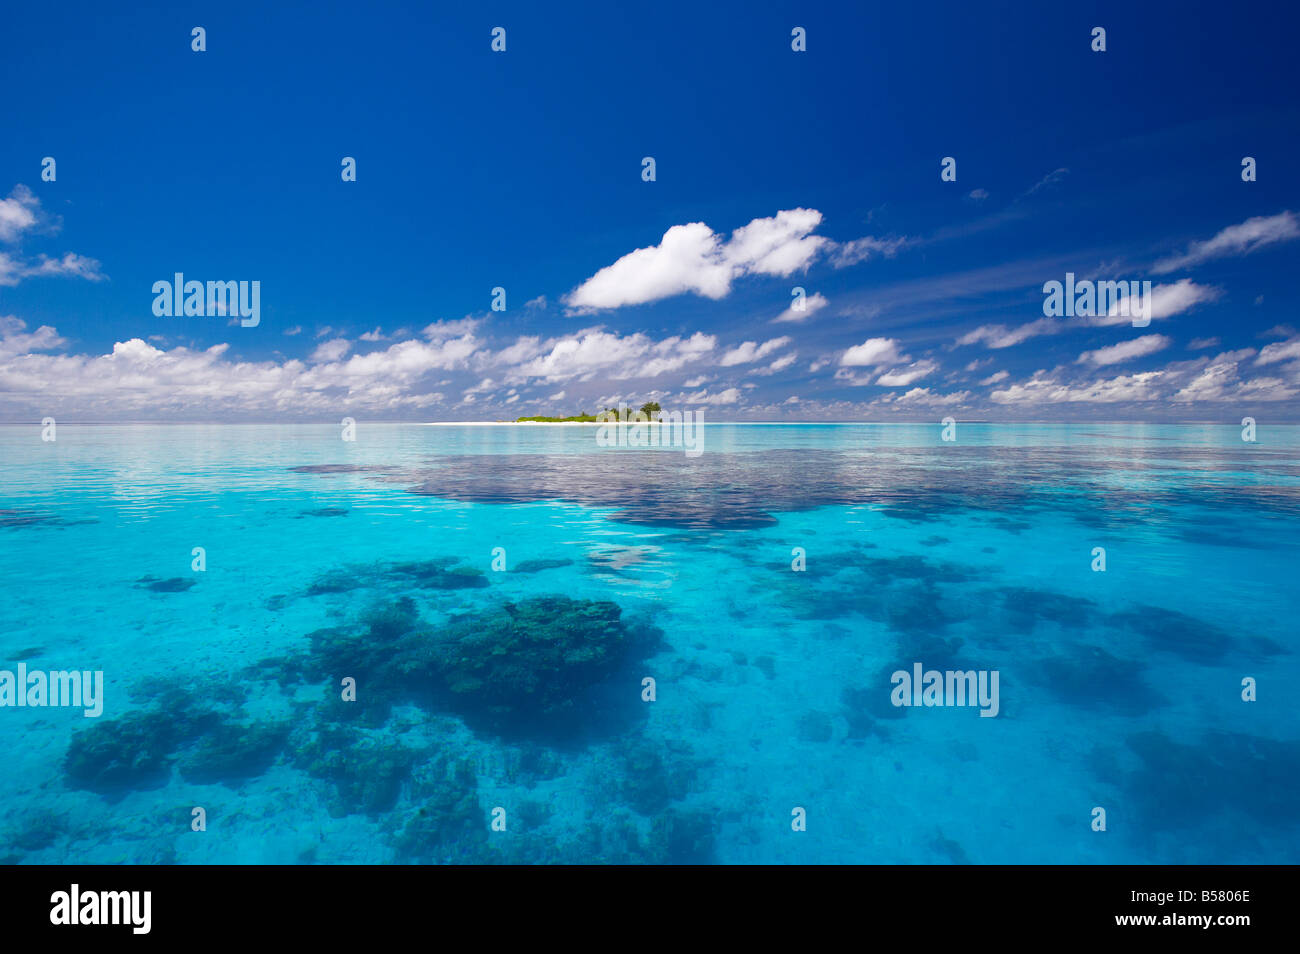 Tropical island surrounded by lagoon, Maldives, Indian Ocean, Asia Stock Photo